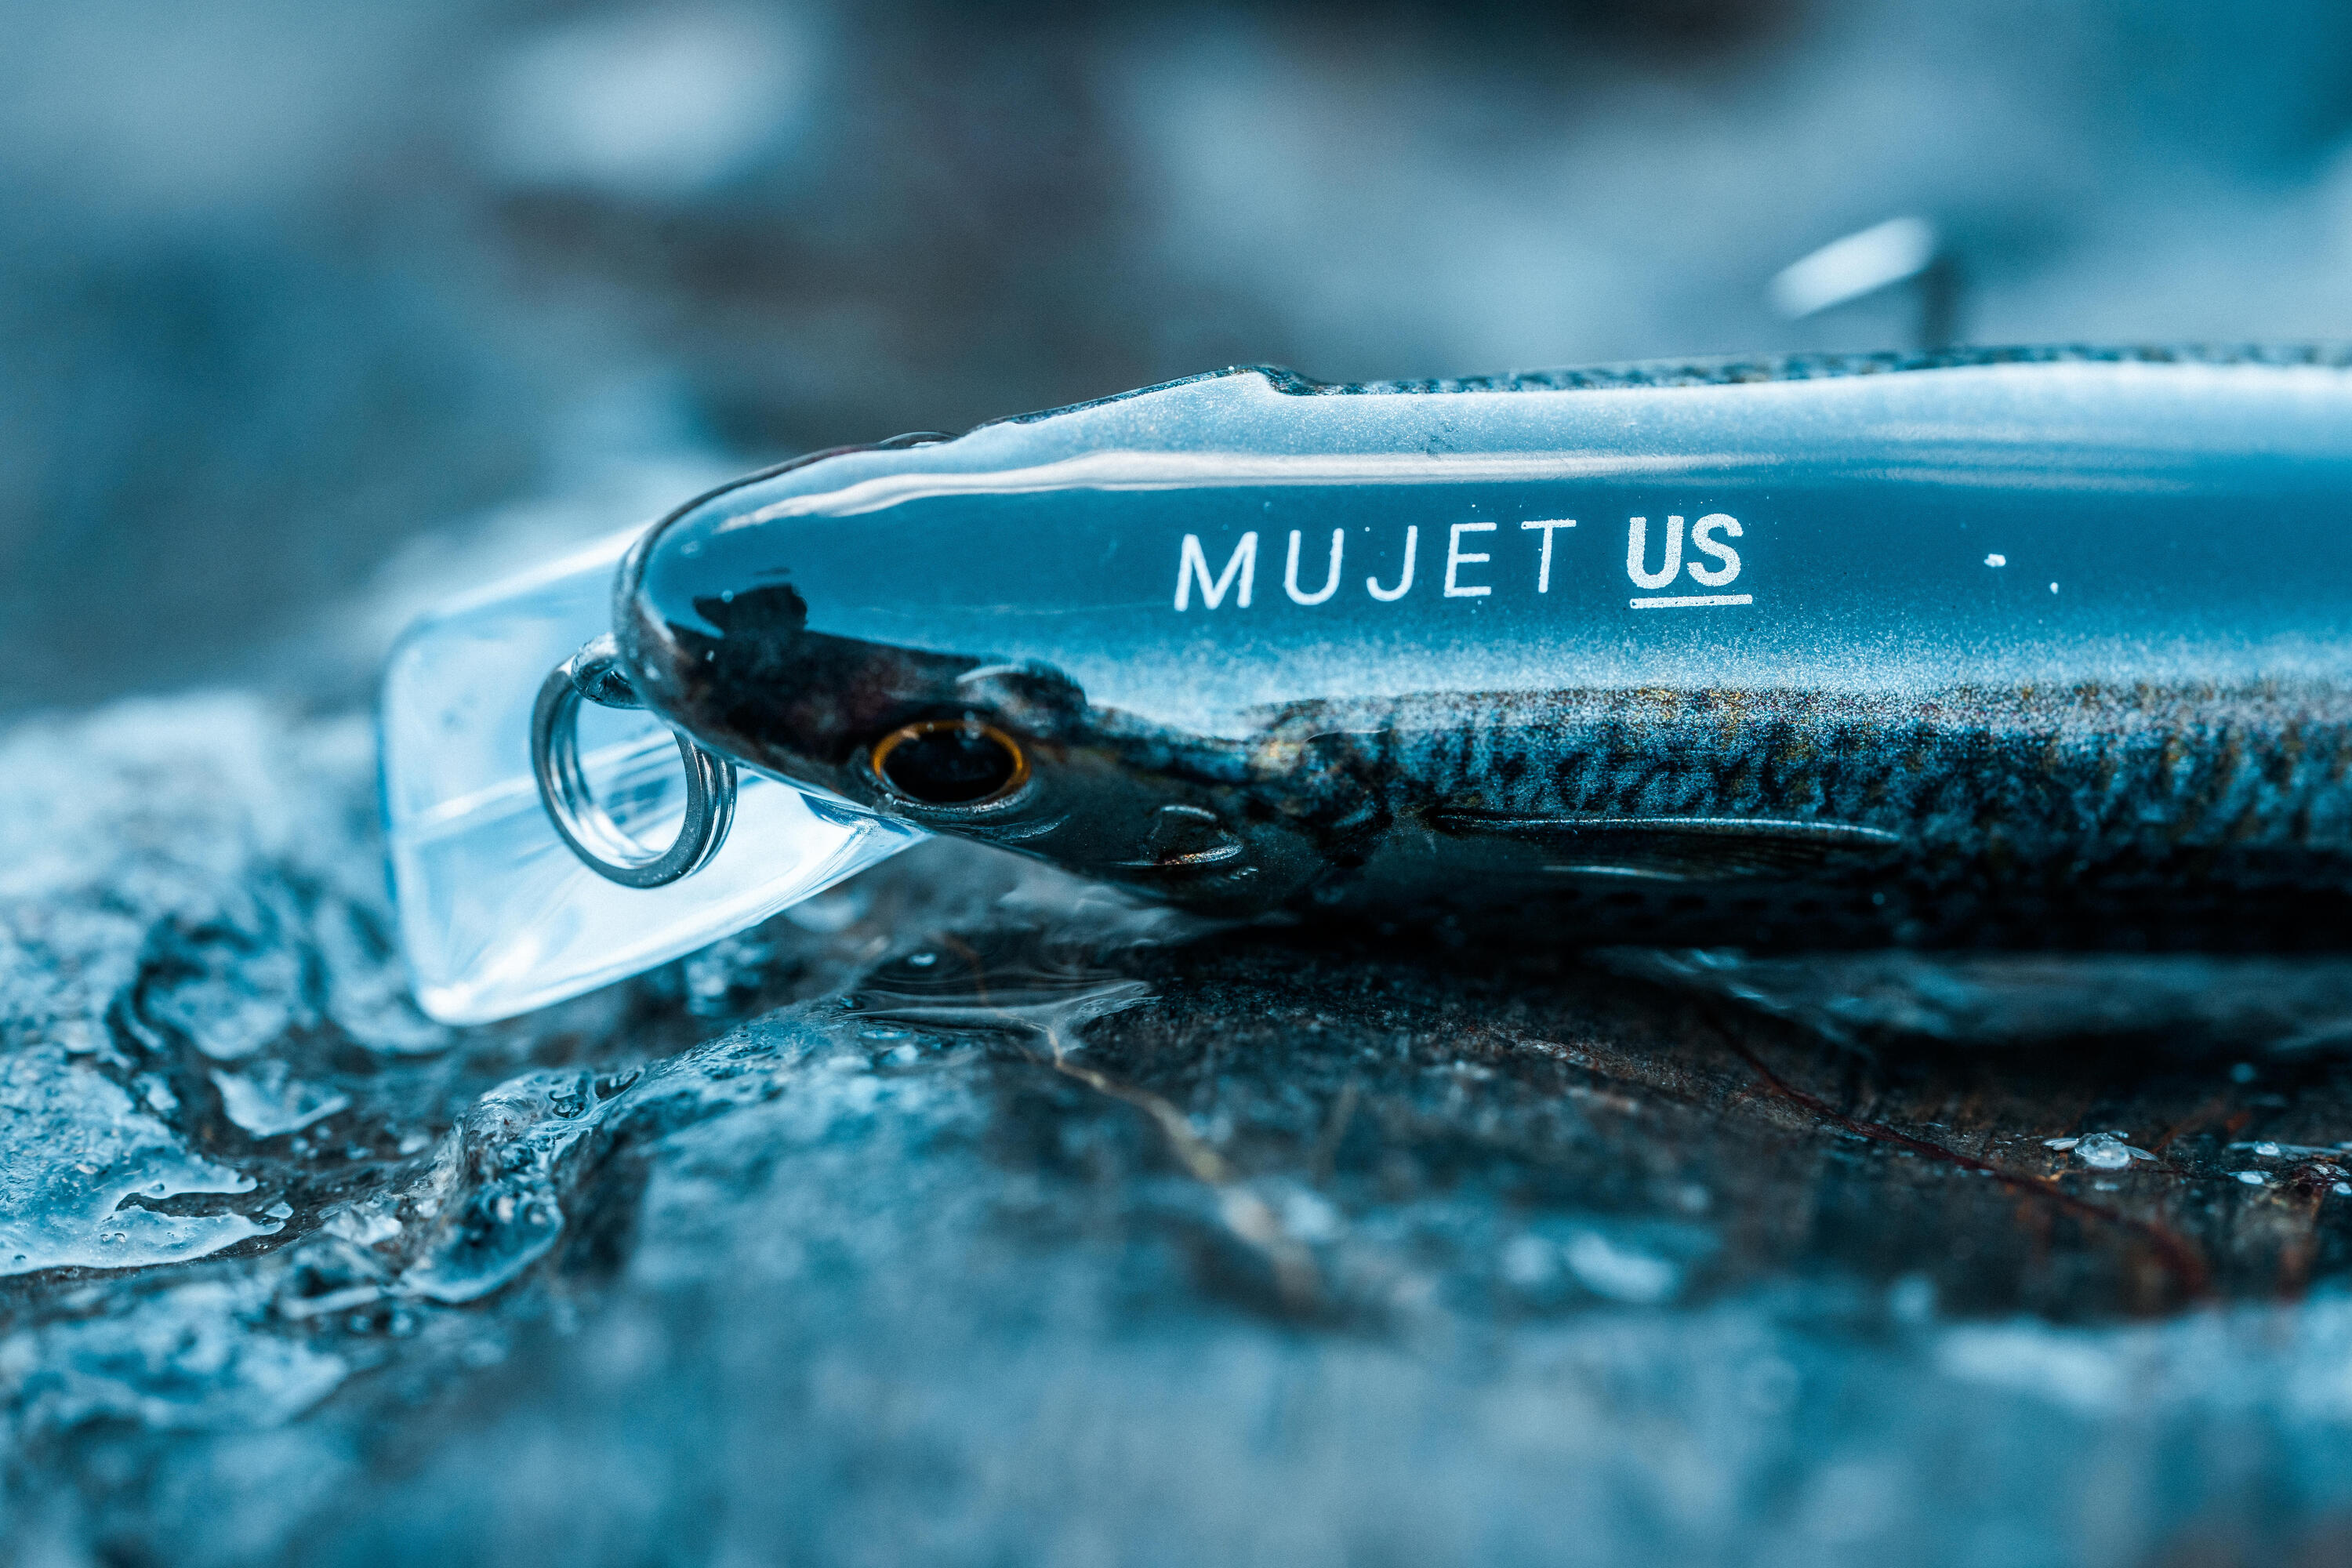 Sea Lure Fishing MUJET 90 US MULLET Lure 4/7